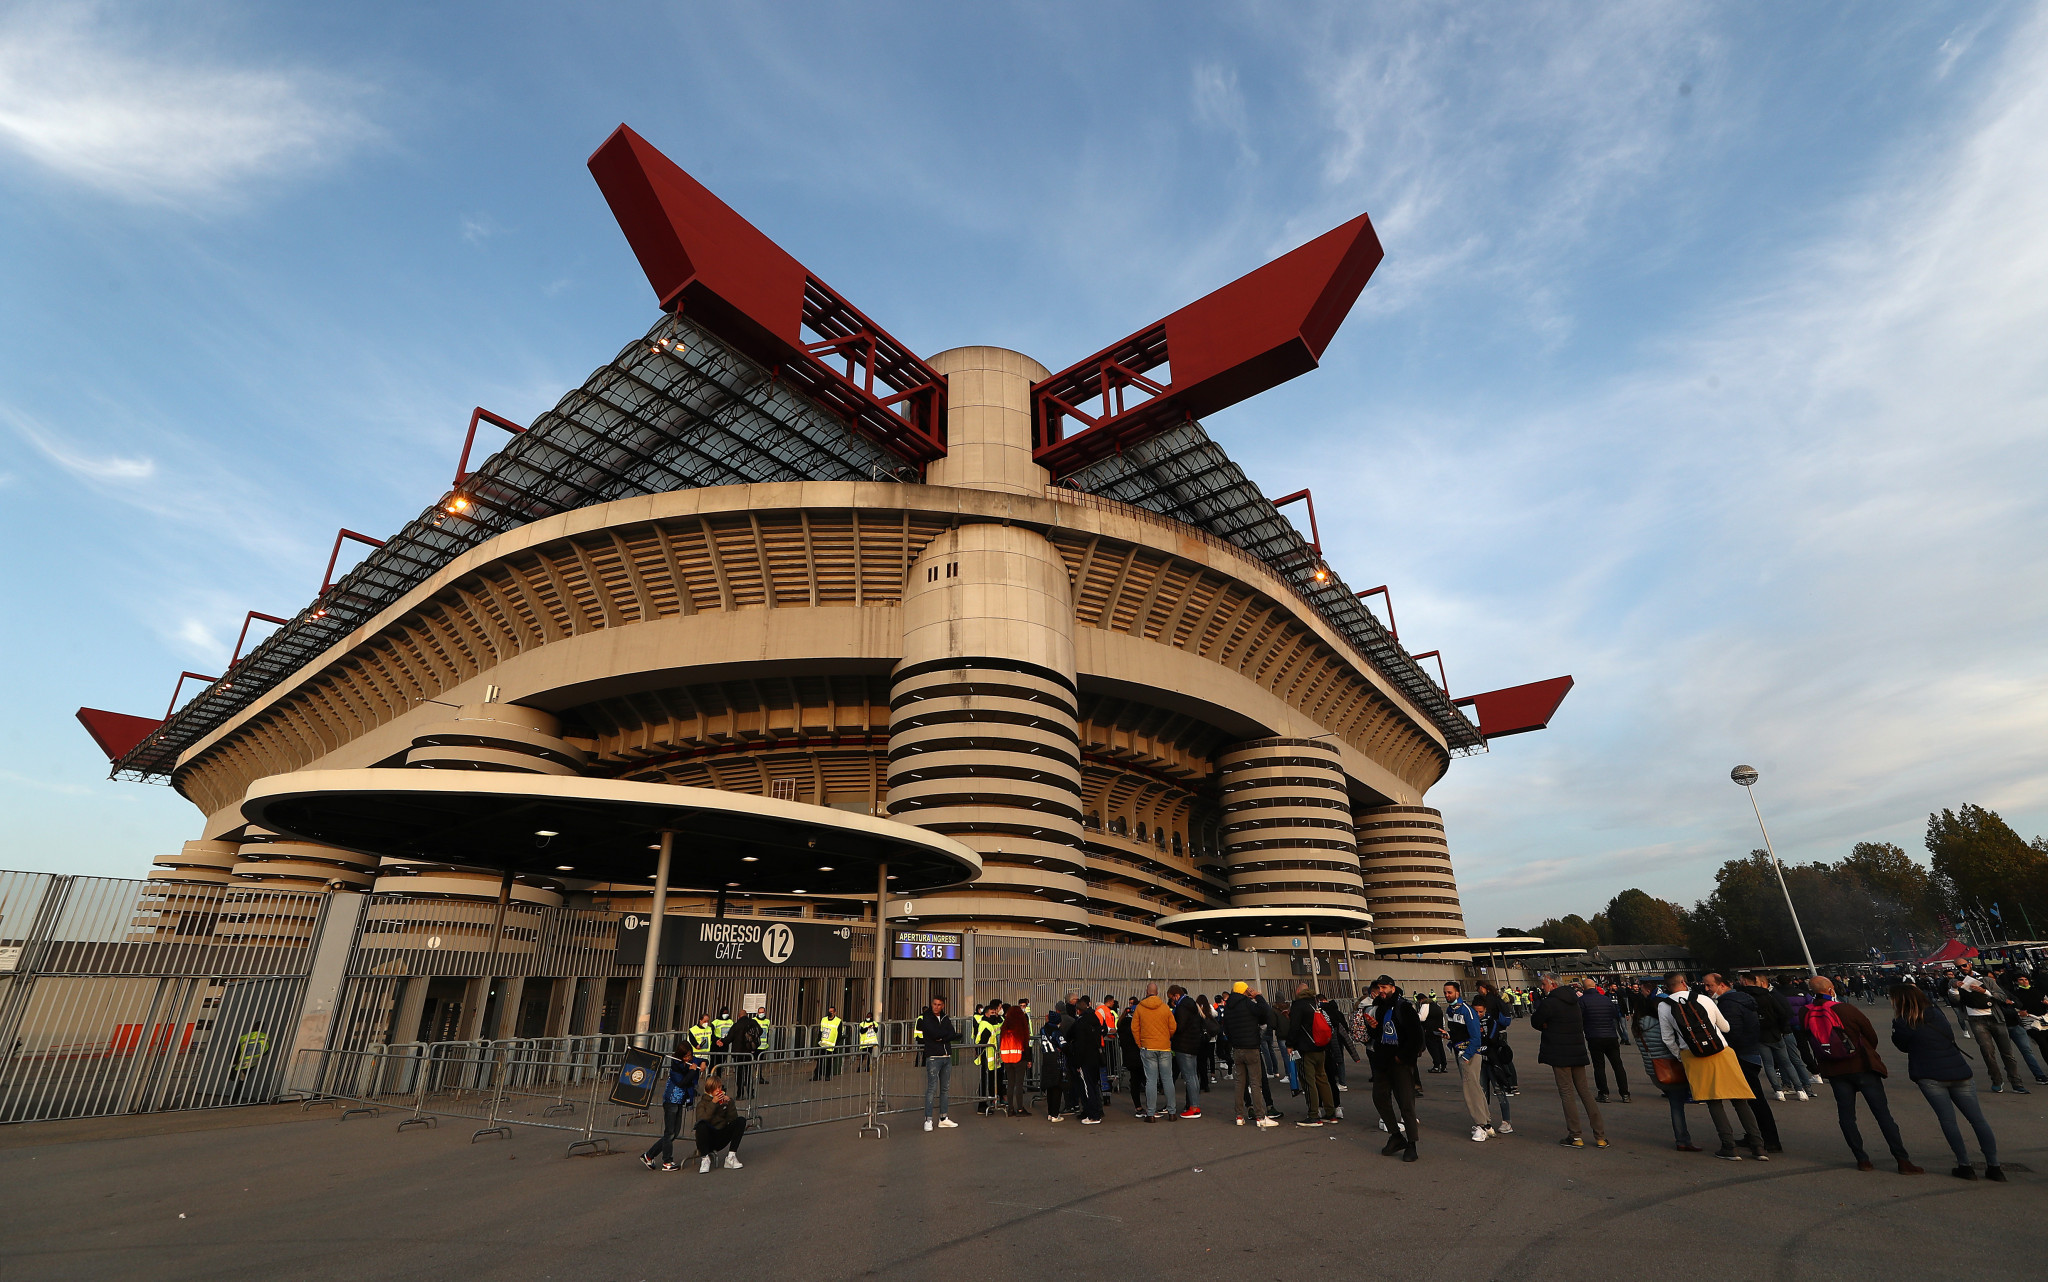 The Regional Commission for the Cultural Heritage of Lombardy decided that the San Siro cannot be torn down as it holds 